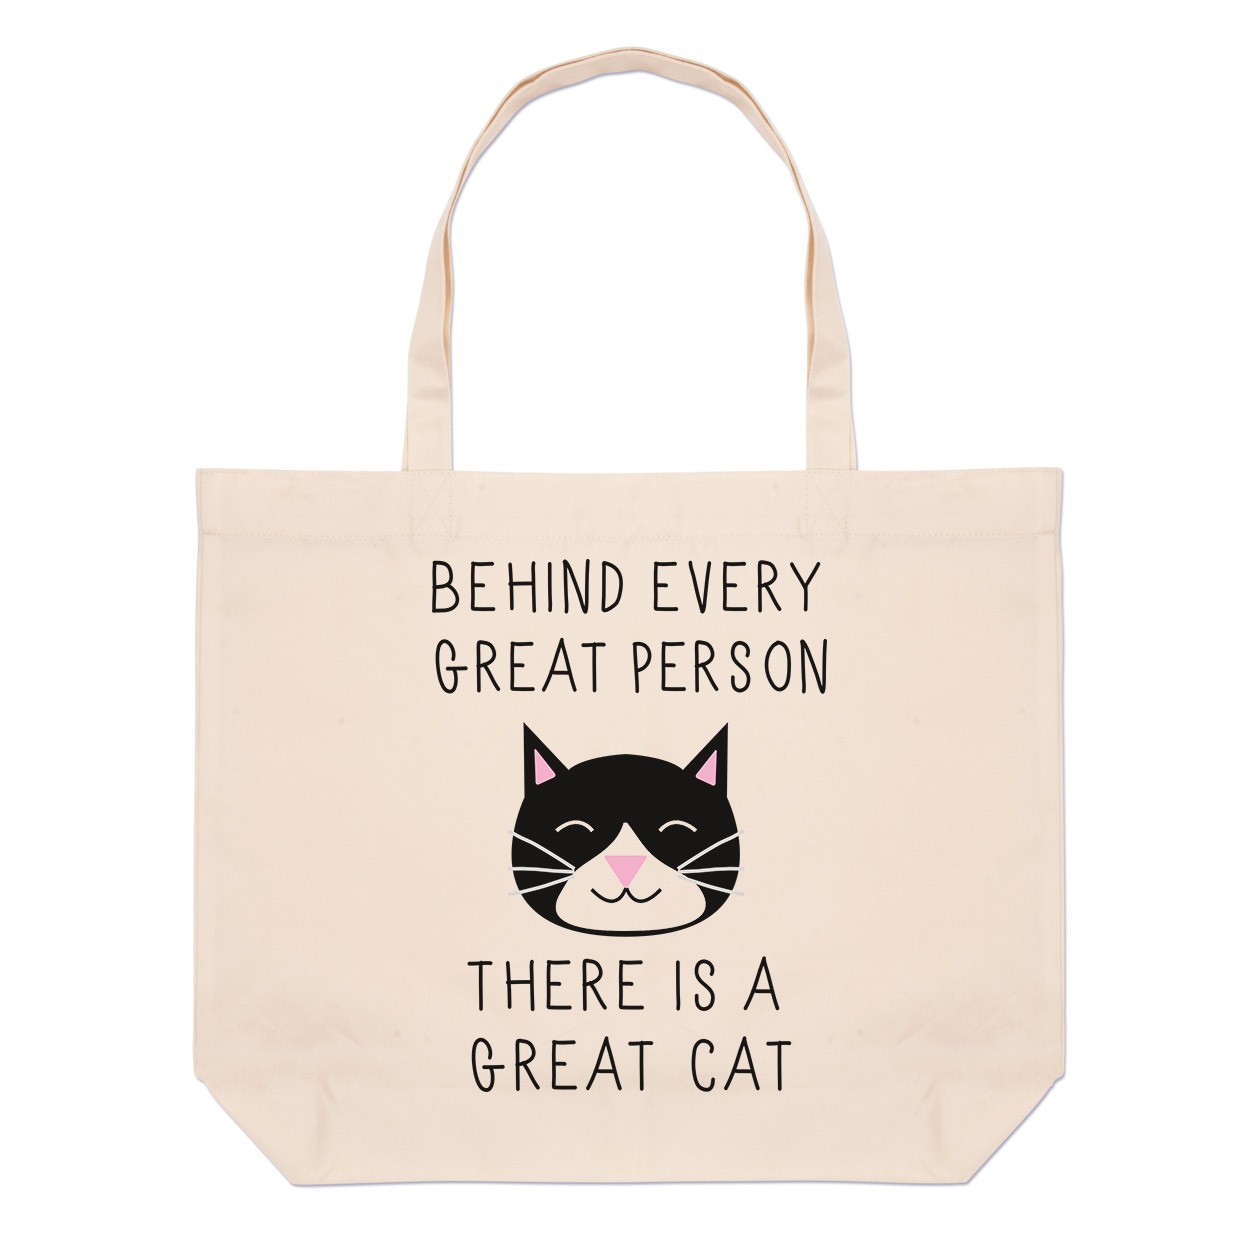 Behind Every Great Person Is A Great Cat Large Beach Tote Bag